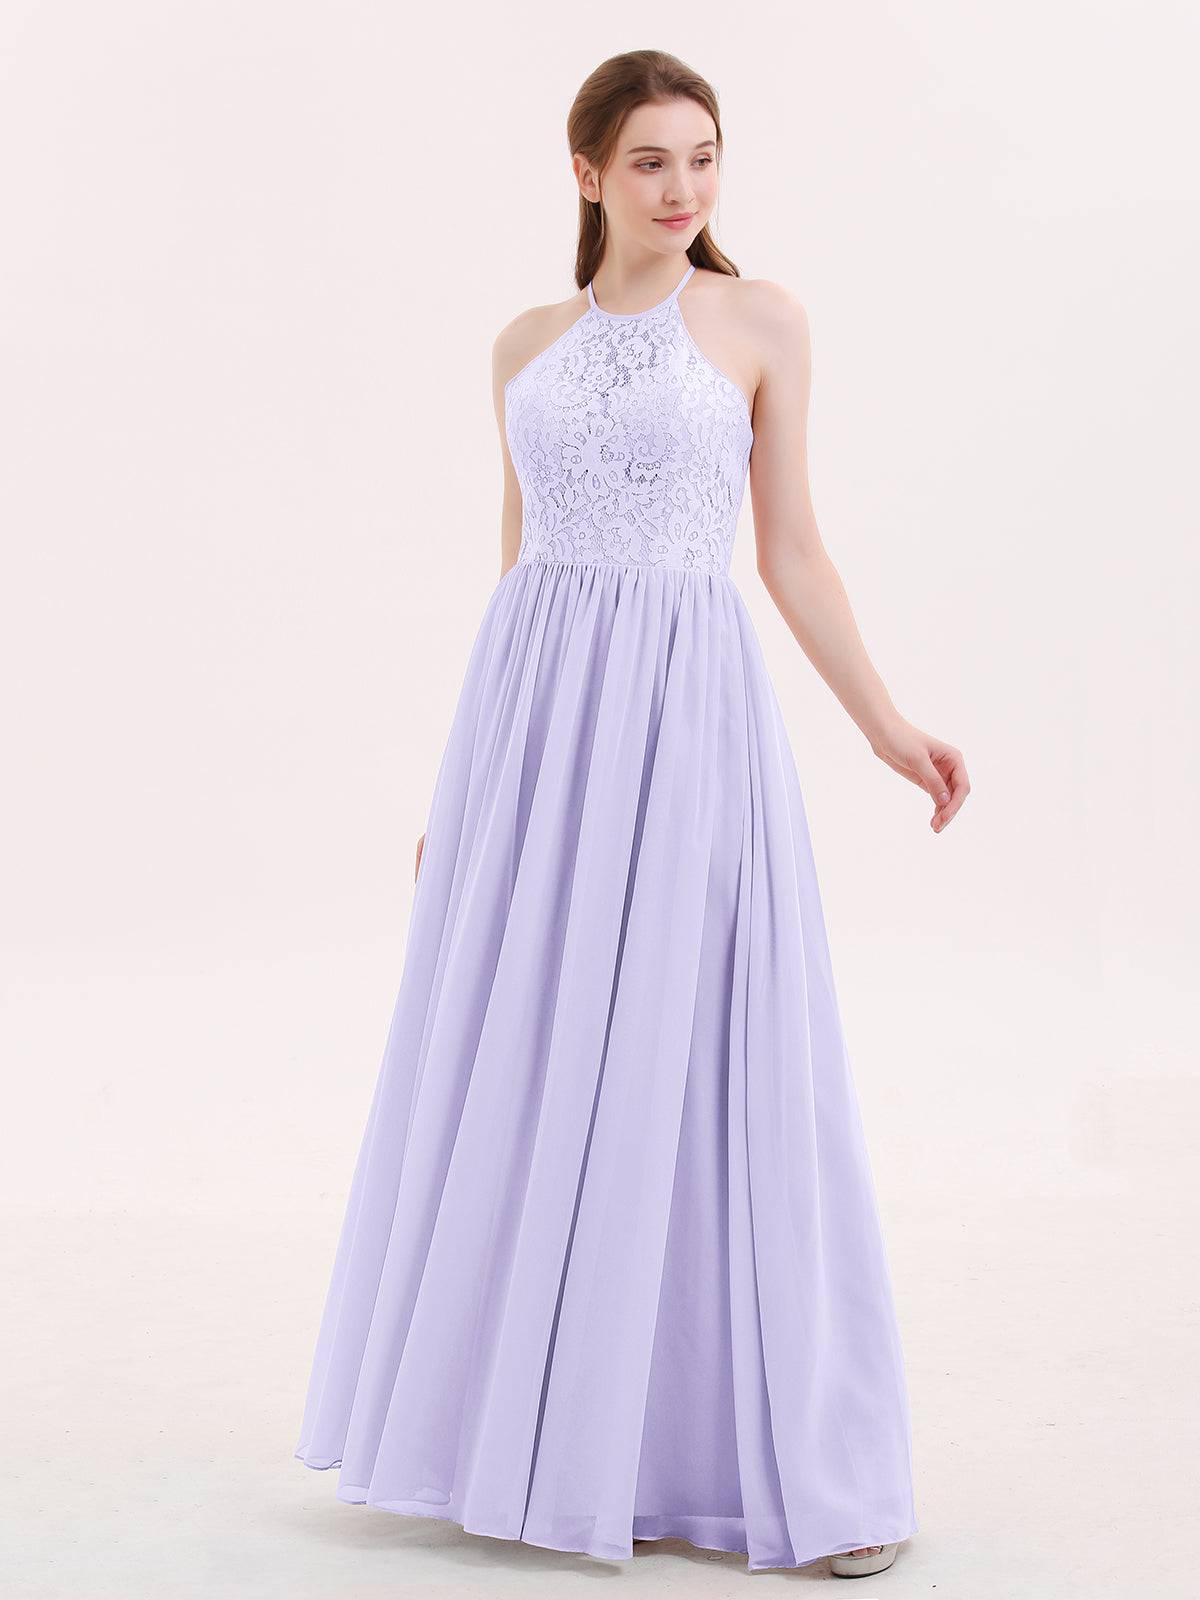 Halter Long Gown with Lace Bodice-Lilac Plus Size Theresa